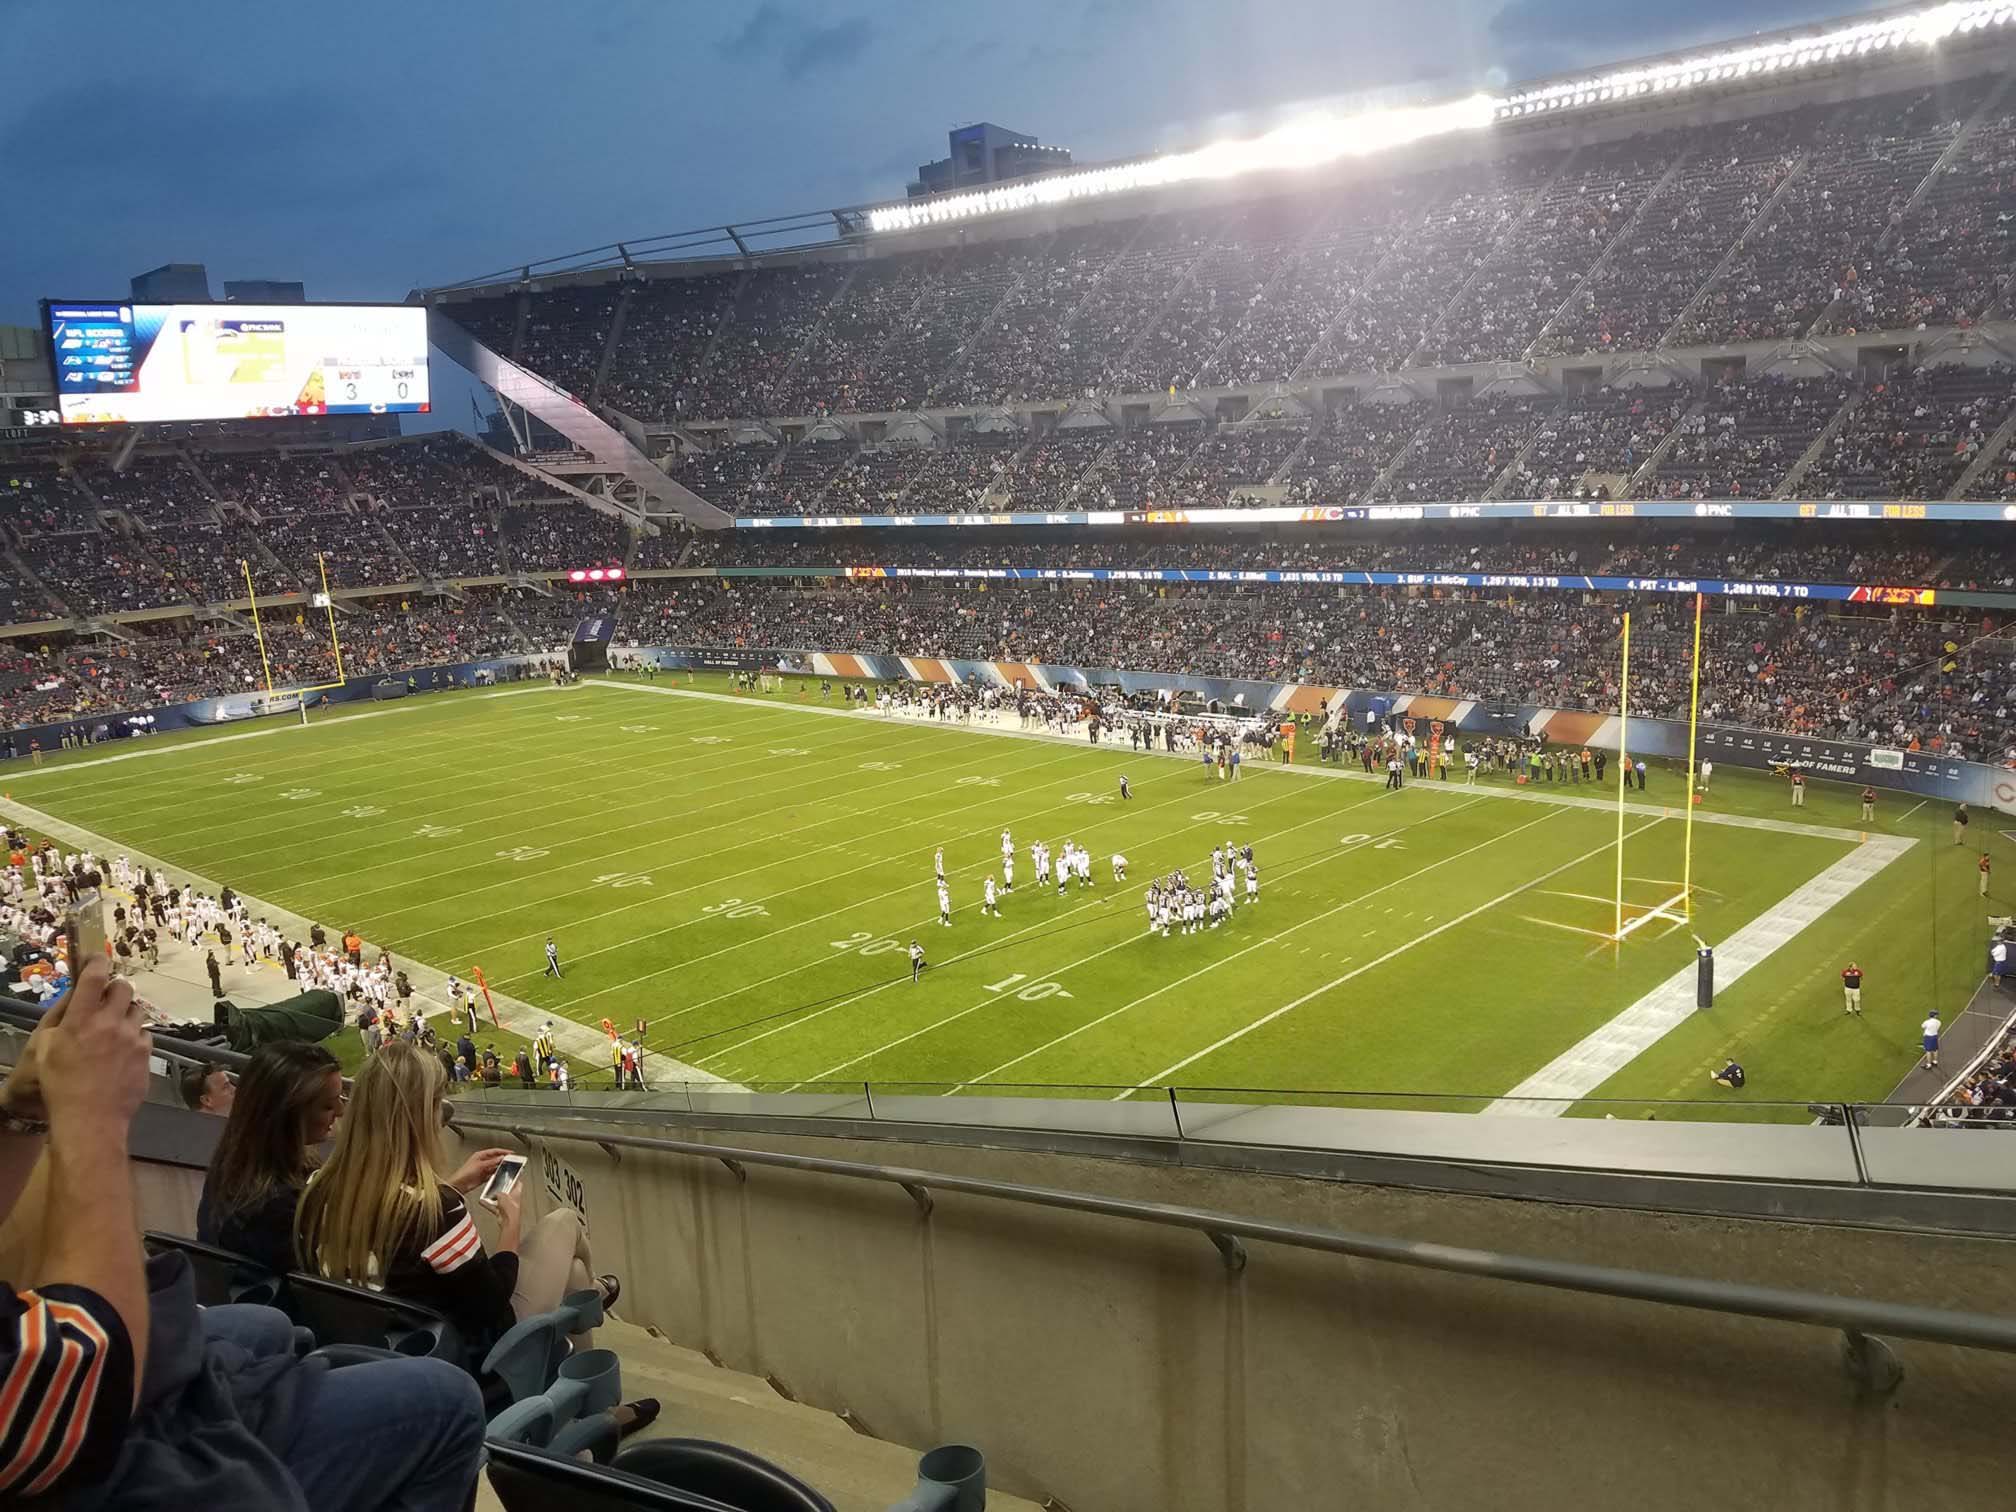 section 302, row 8 seat view  for football - soldier field